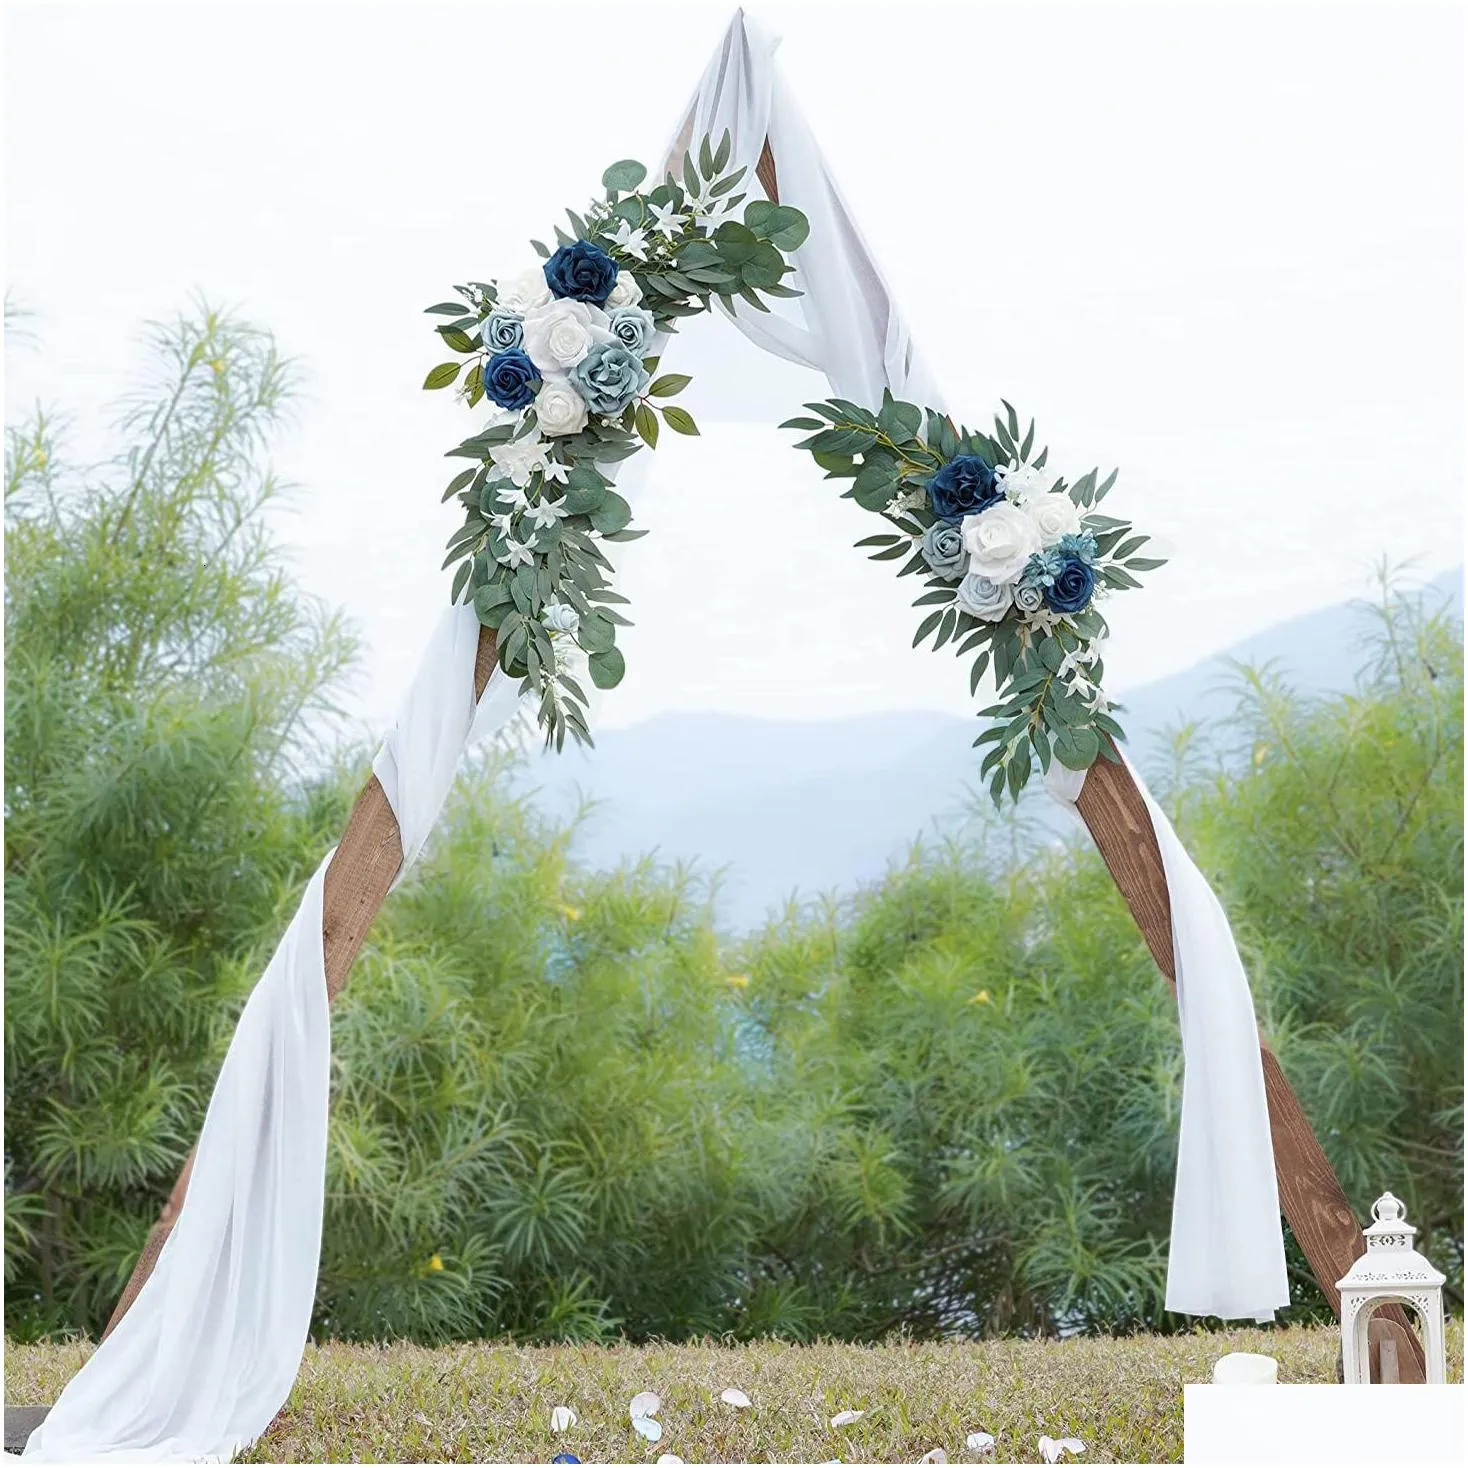 dried flowers yan artificial wedding arch kit boho dusty rose blue eucalyptus garland drapes for decorations welcome sign 230613